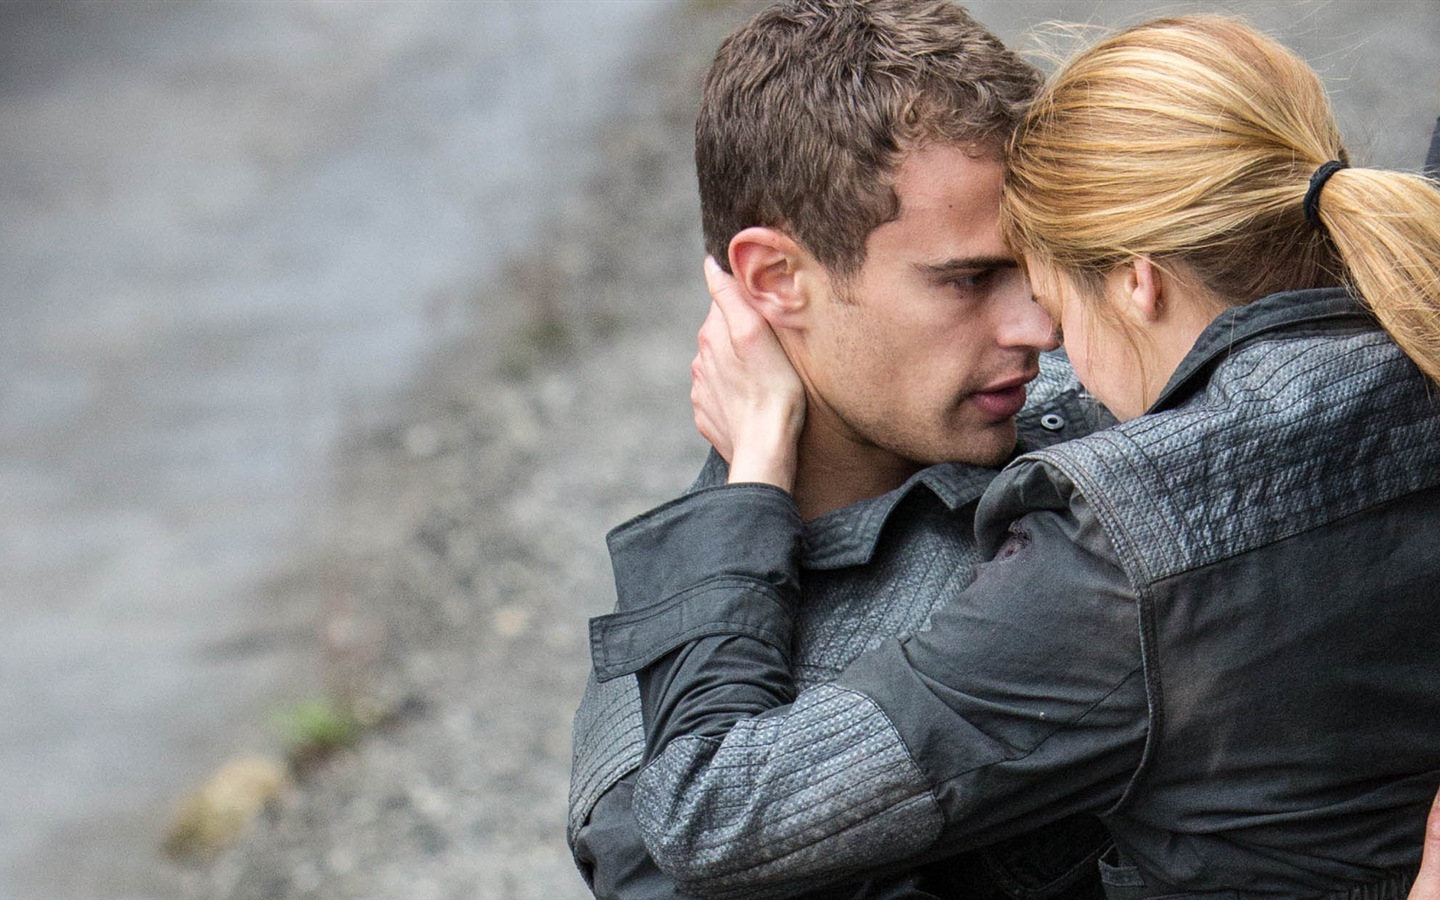 Divergent movie HD wallpapers #12 - 1440x900